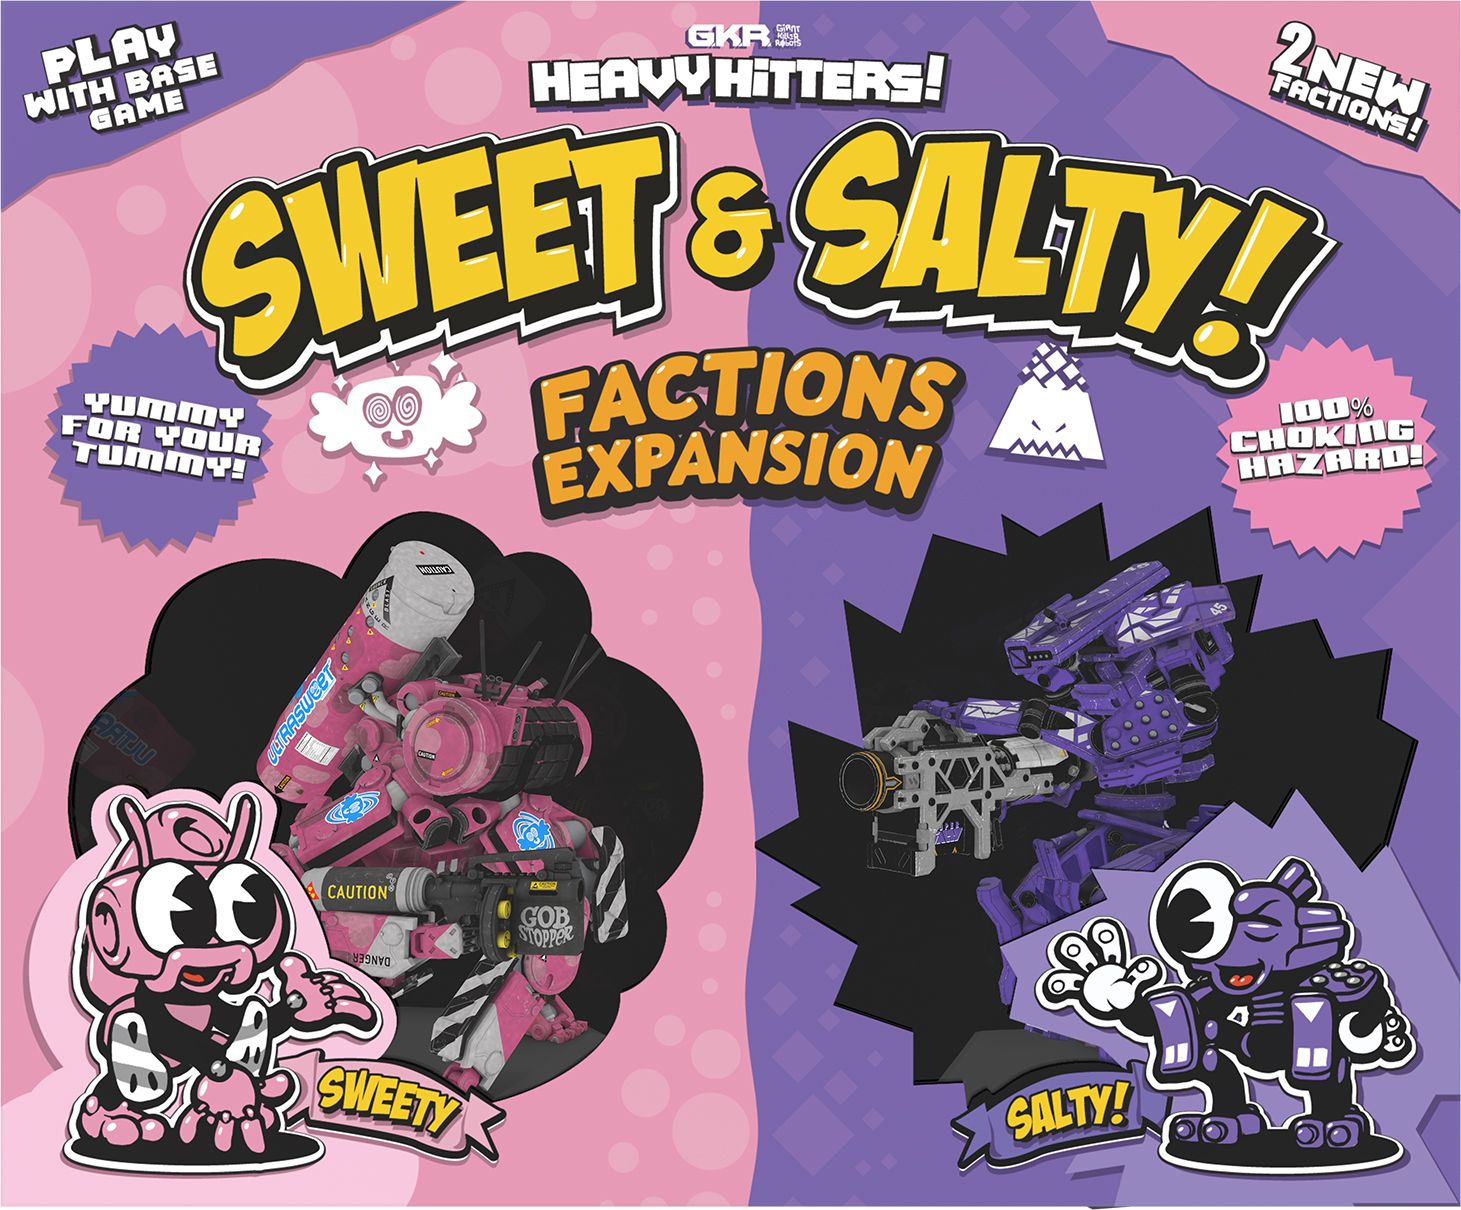 GKR: Heavy Hitters – Sweet & Salty Factions Expansion